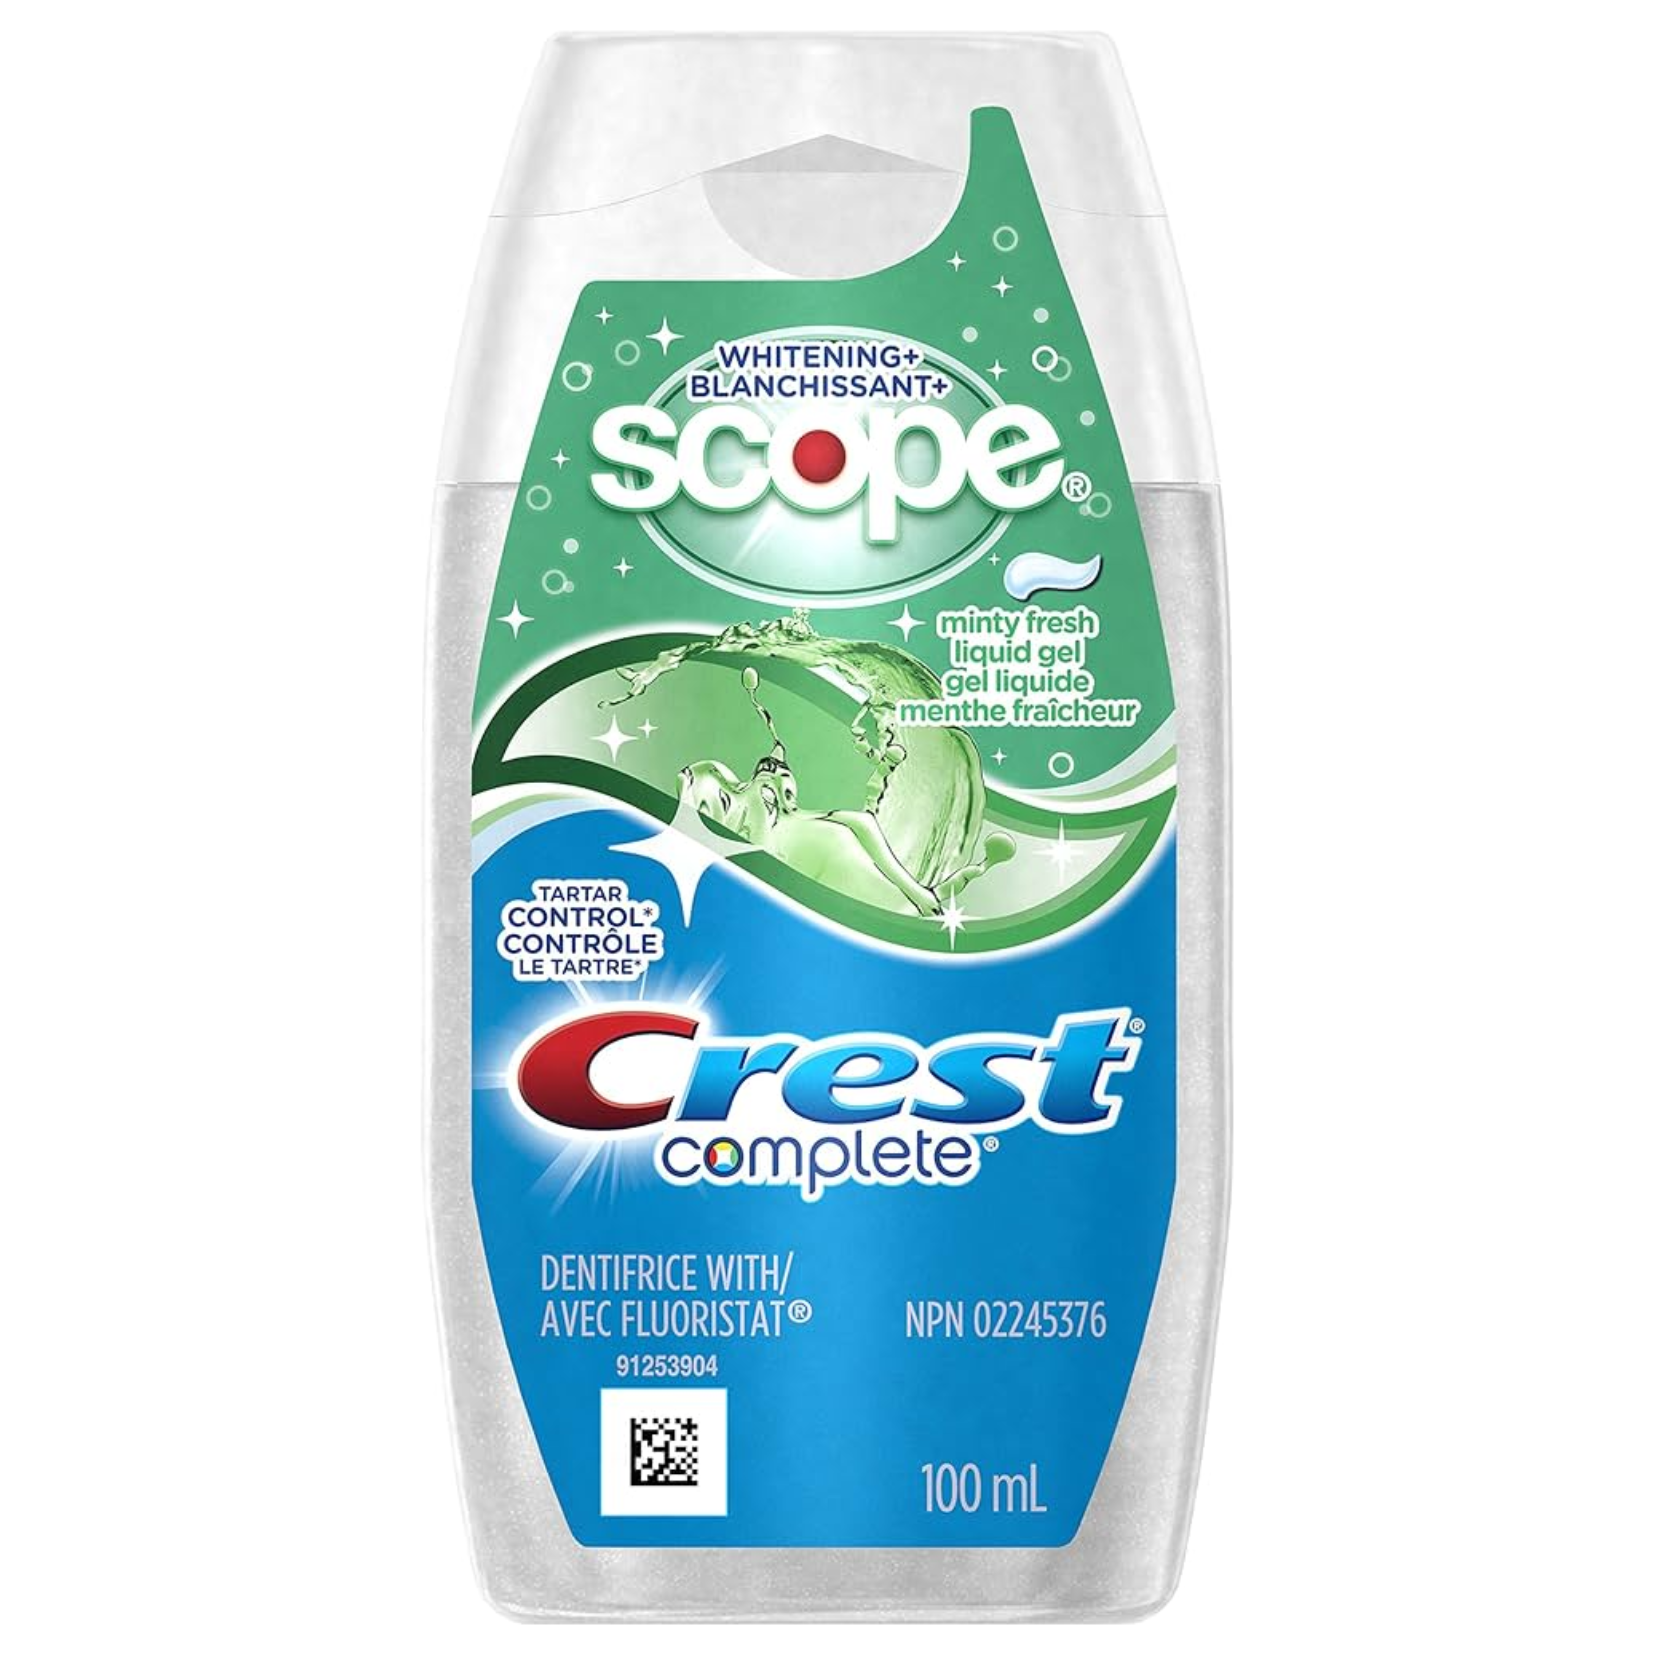 Crest Complete Whitening With Scope Toothpaste 100ml